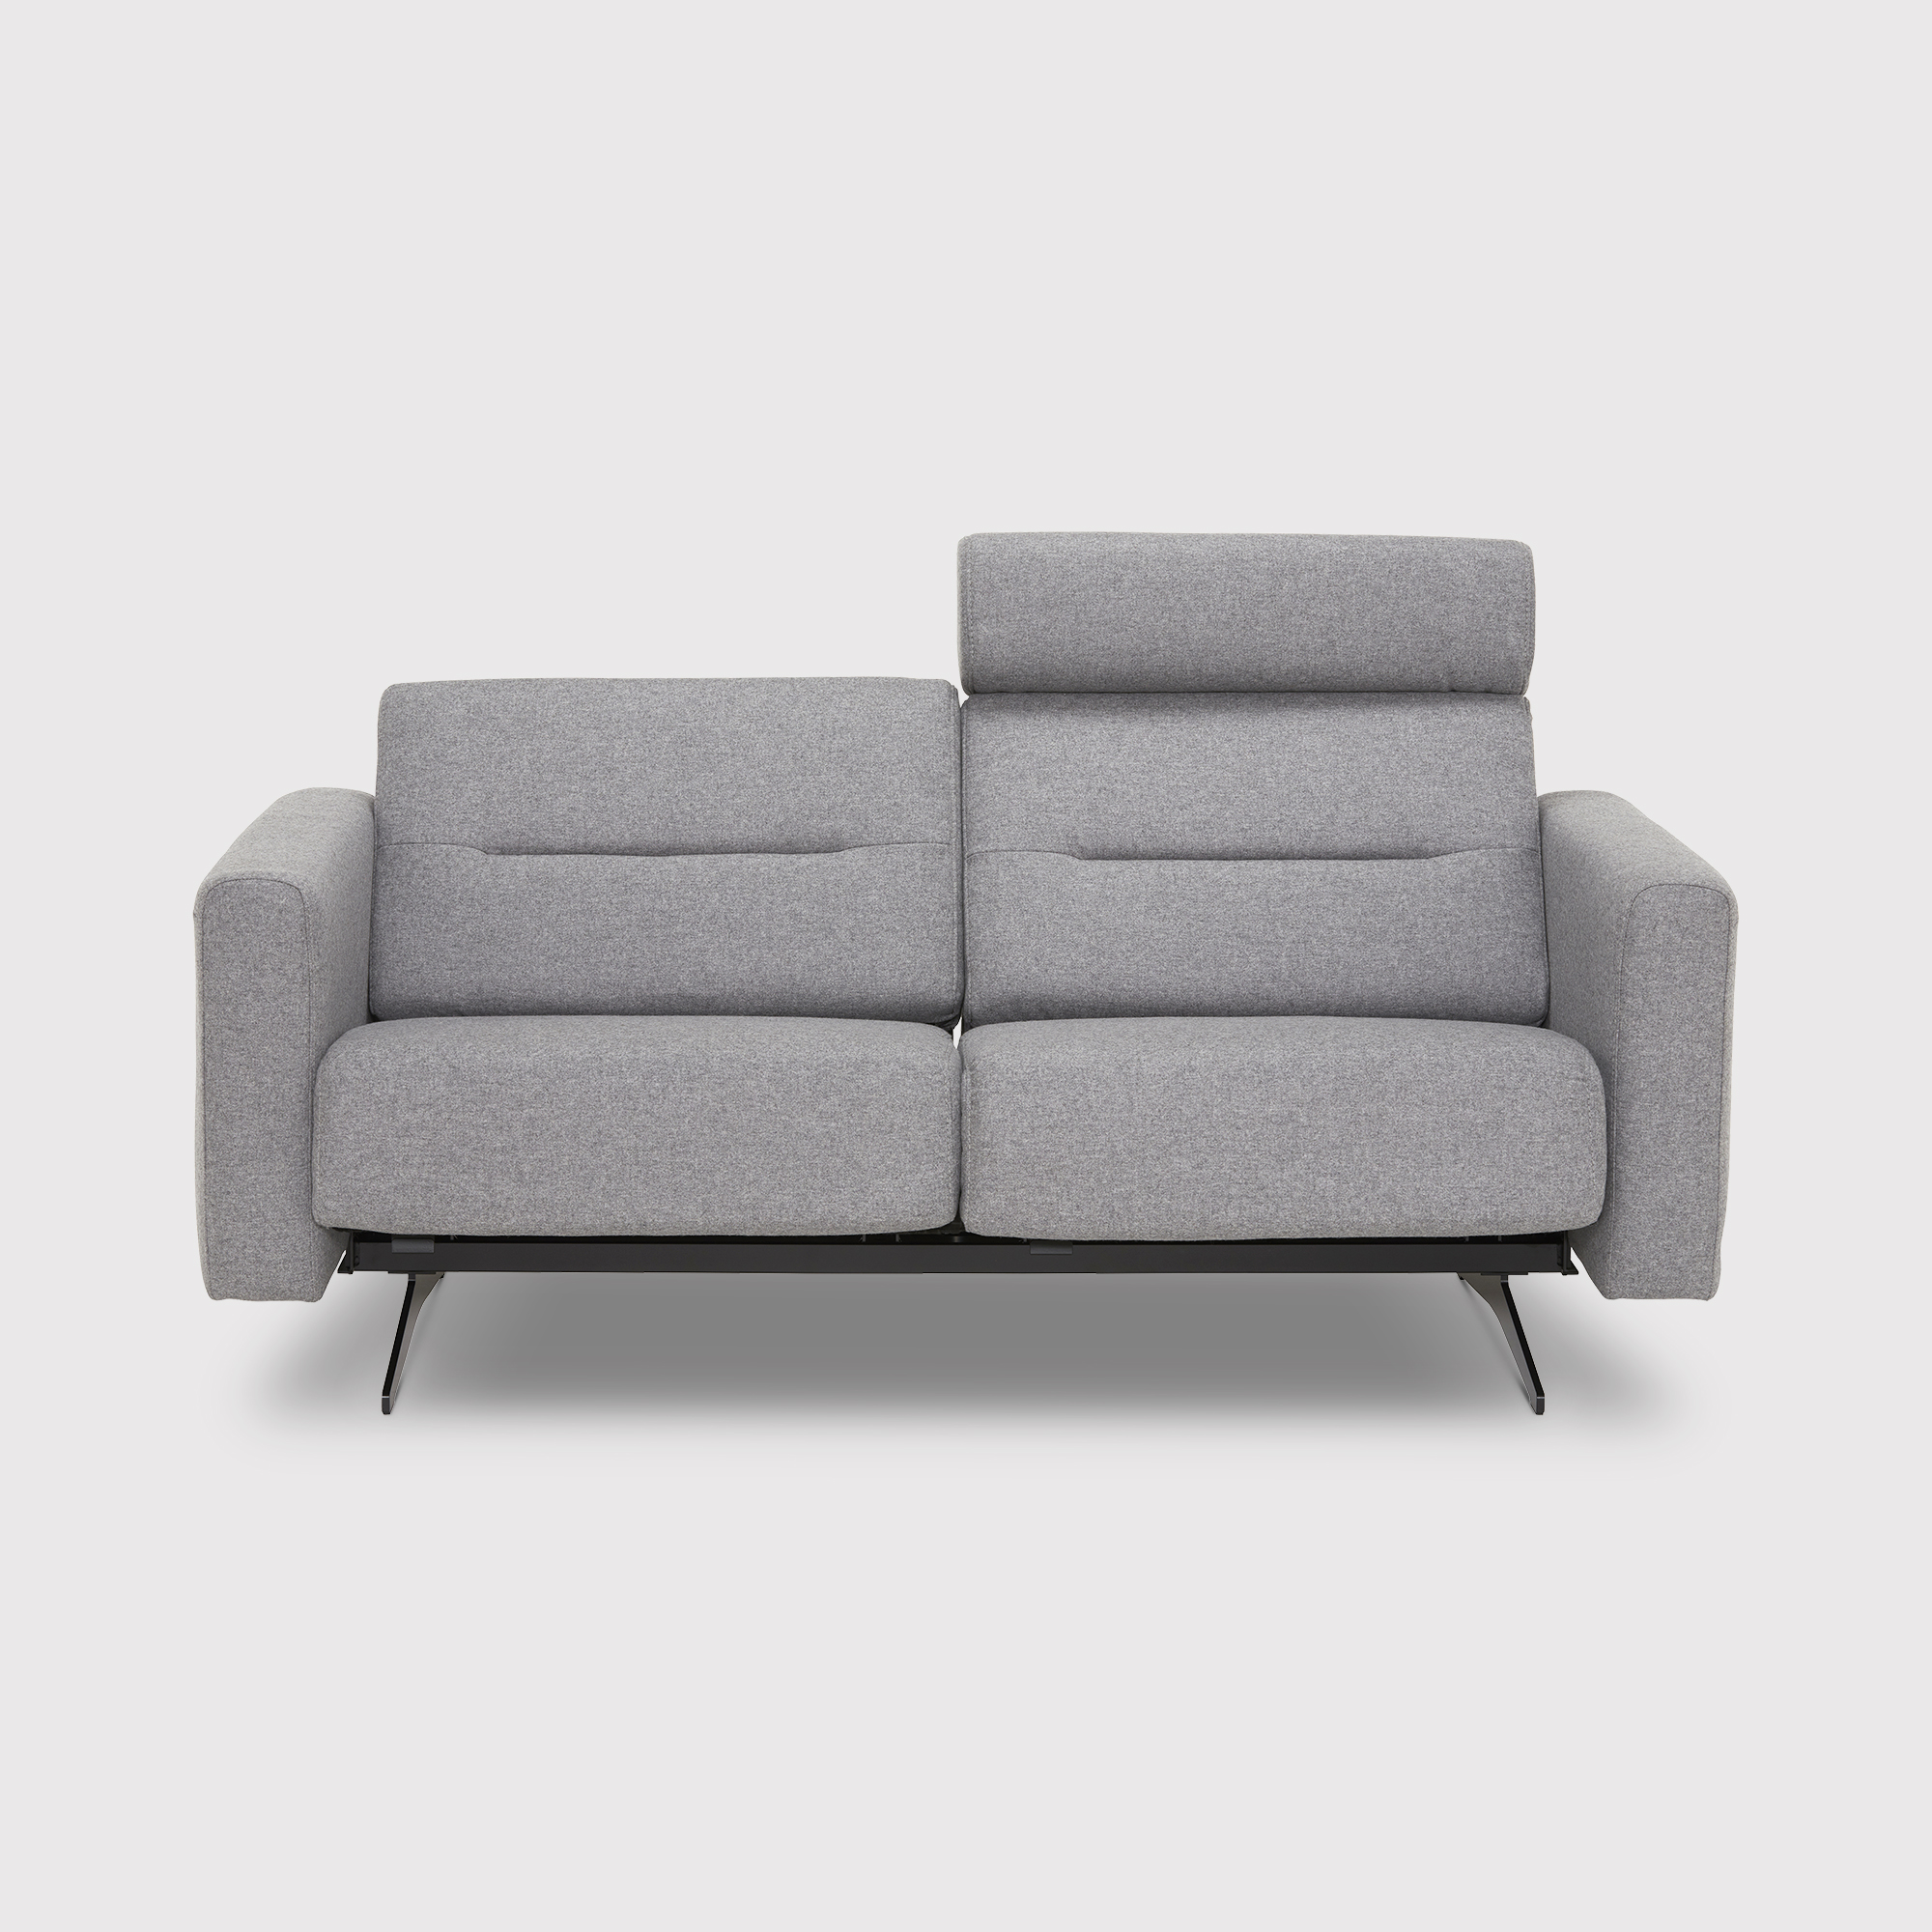 Stressless Stella 2 Seater Recliner Sofa With S2 Arms & Headrest, Grey Fabric | Barker & Stonehouse